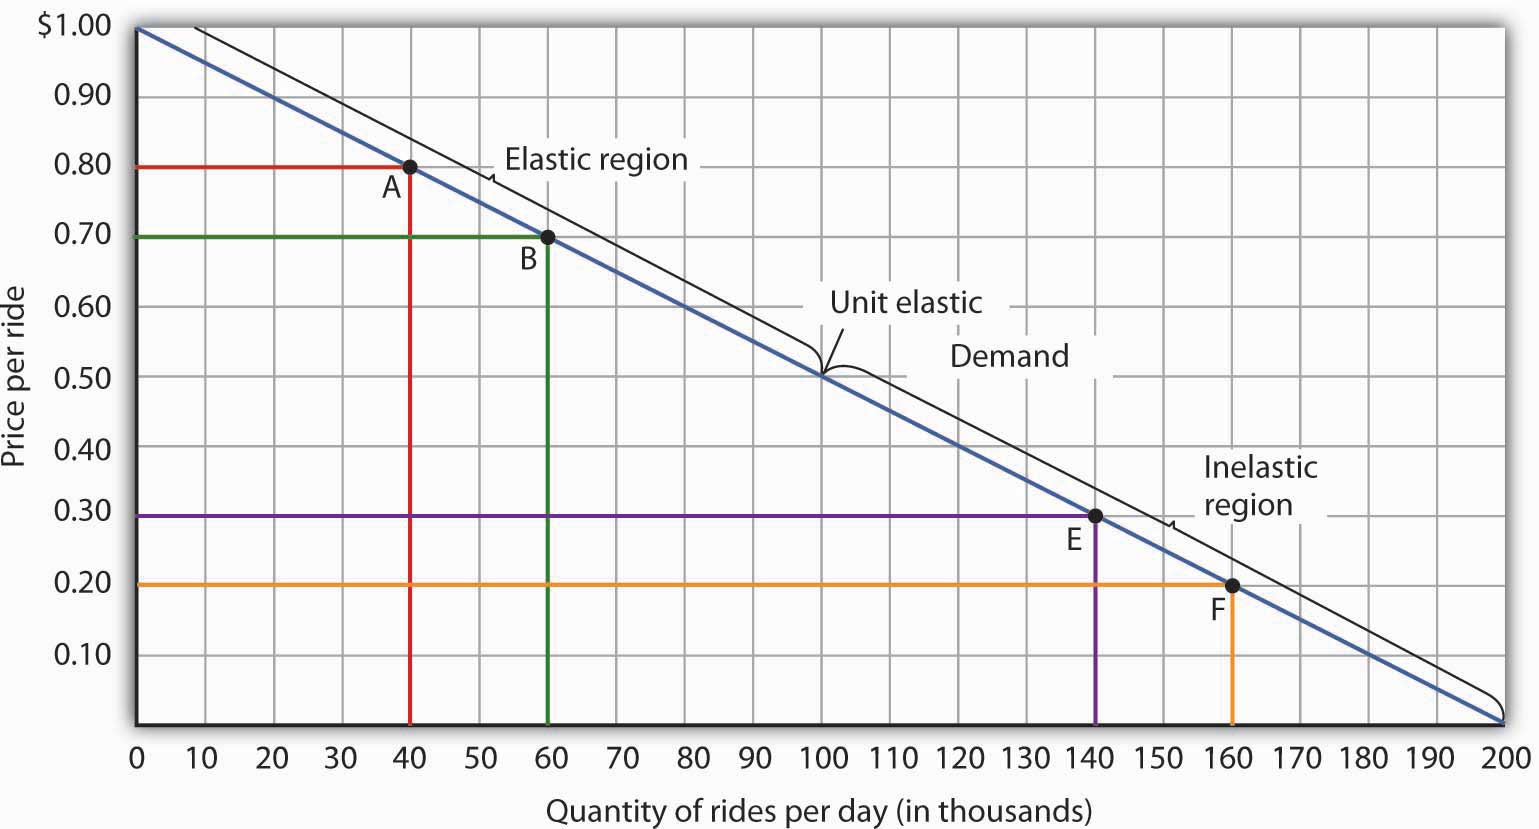 Changes in Total Revenue and a Linear Demand Curve. Moving from point A to point B implies a reduction in price and an increase in the quantity demanded. Demand is elastic between these two points. Total revenue, shown by the areas of the rectangles drawn from points A and B to the origin, rises. When we move from point E to point F, which is in the inelastic region of the demand curve, total revenue falls.